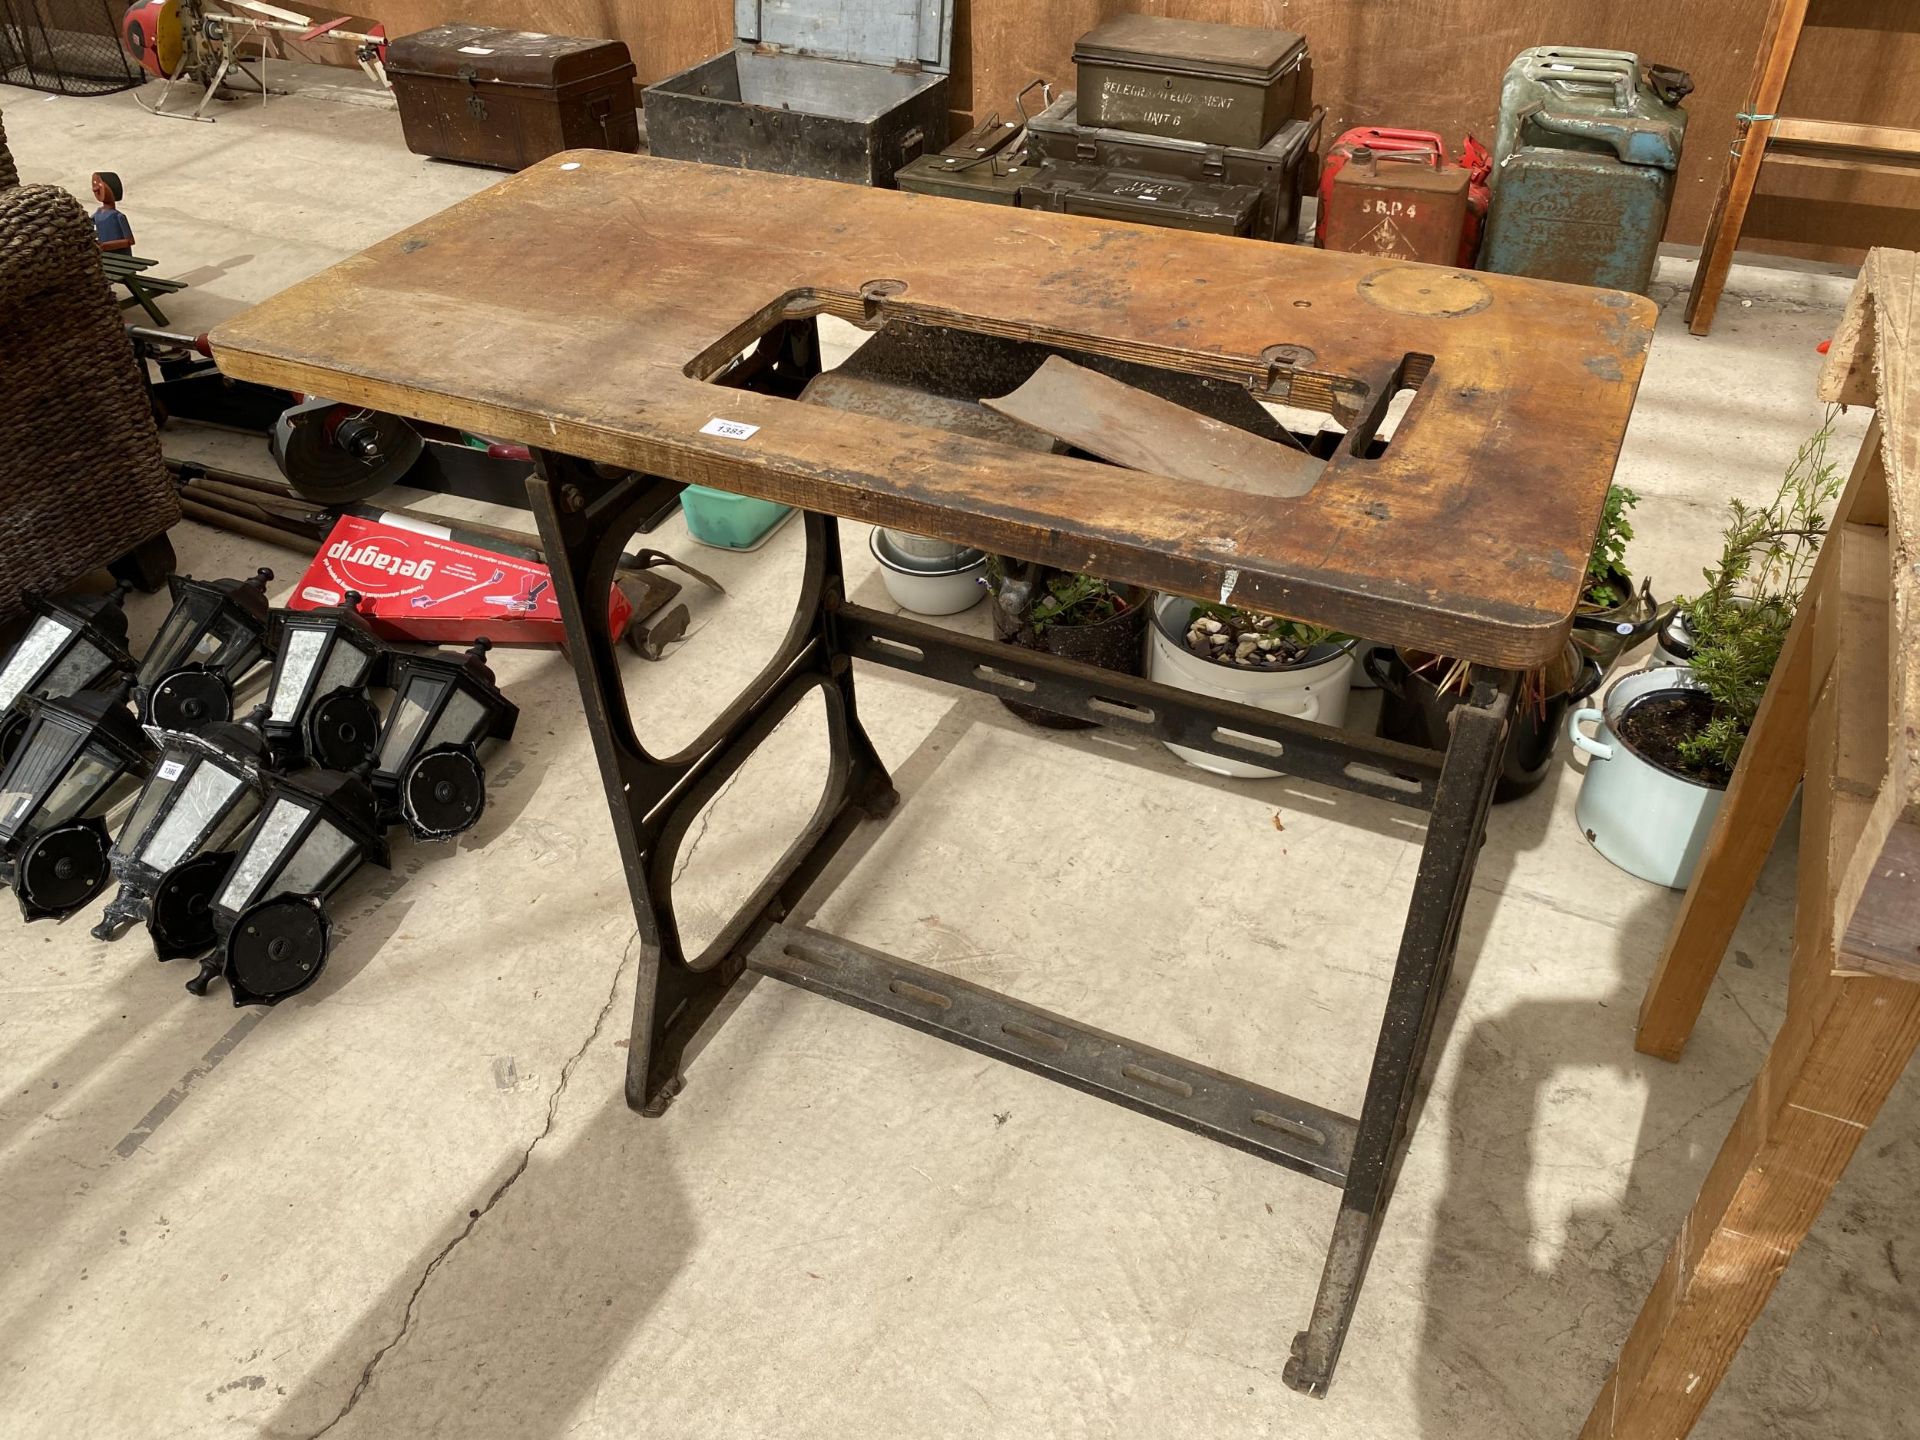 AN INDUSTRIAL SEWING MACHINE TABLE WITH HEAVY CAST IRON BASE